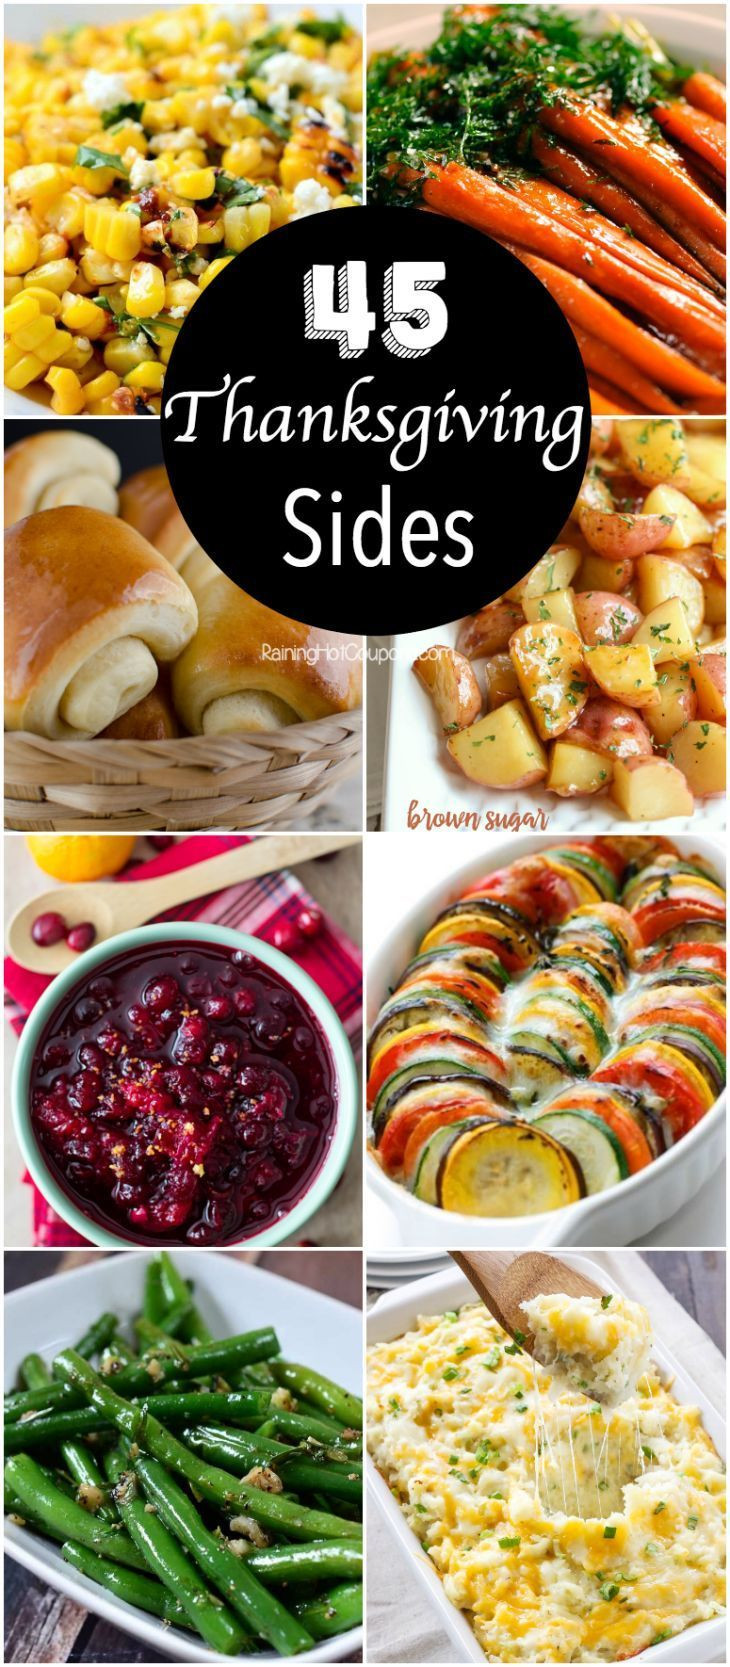 Thanksgiving Potluck Side Dishes
 1000 ideas about Thanksgiving Potluck on Pinterest